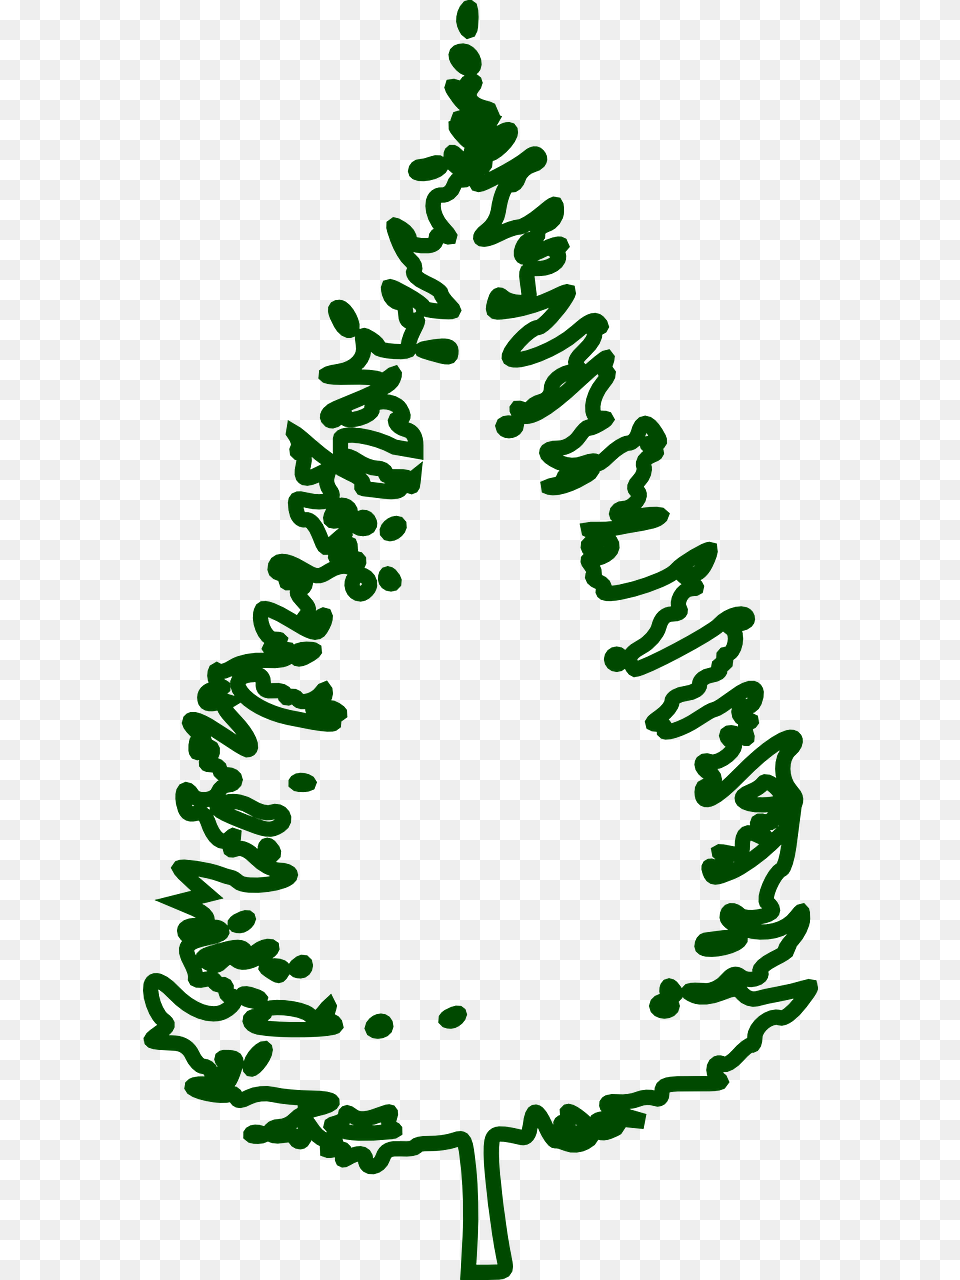 Fir Vector Graphicsfree Christmas Tree Outline, Plant, Green, Christmas Decorations, Festival Free Png Download